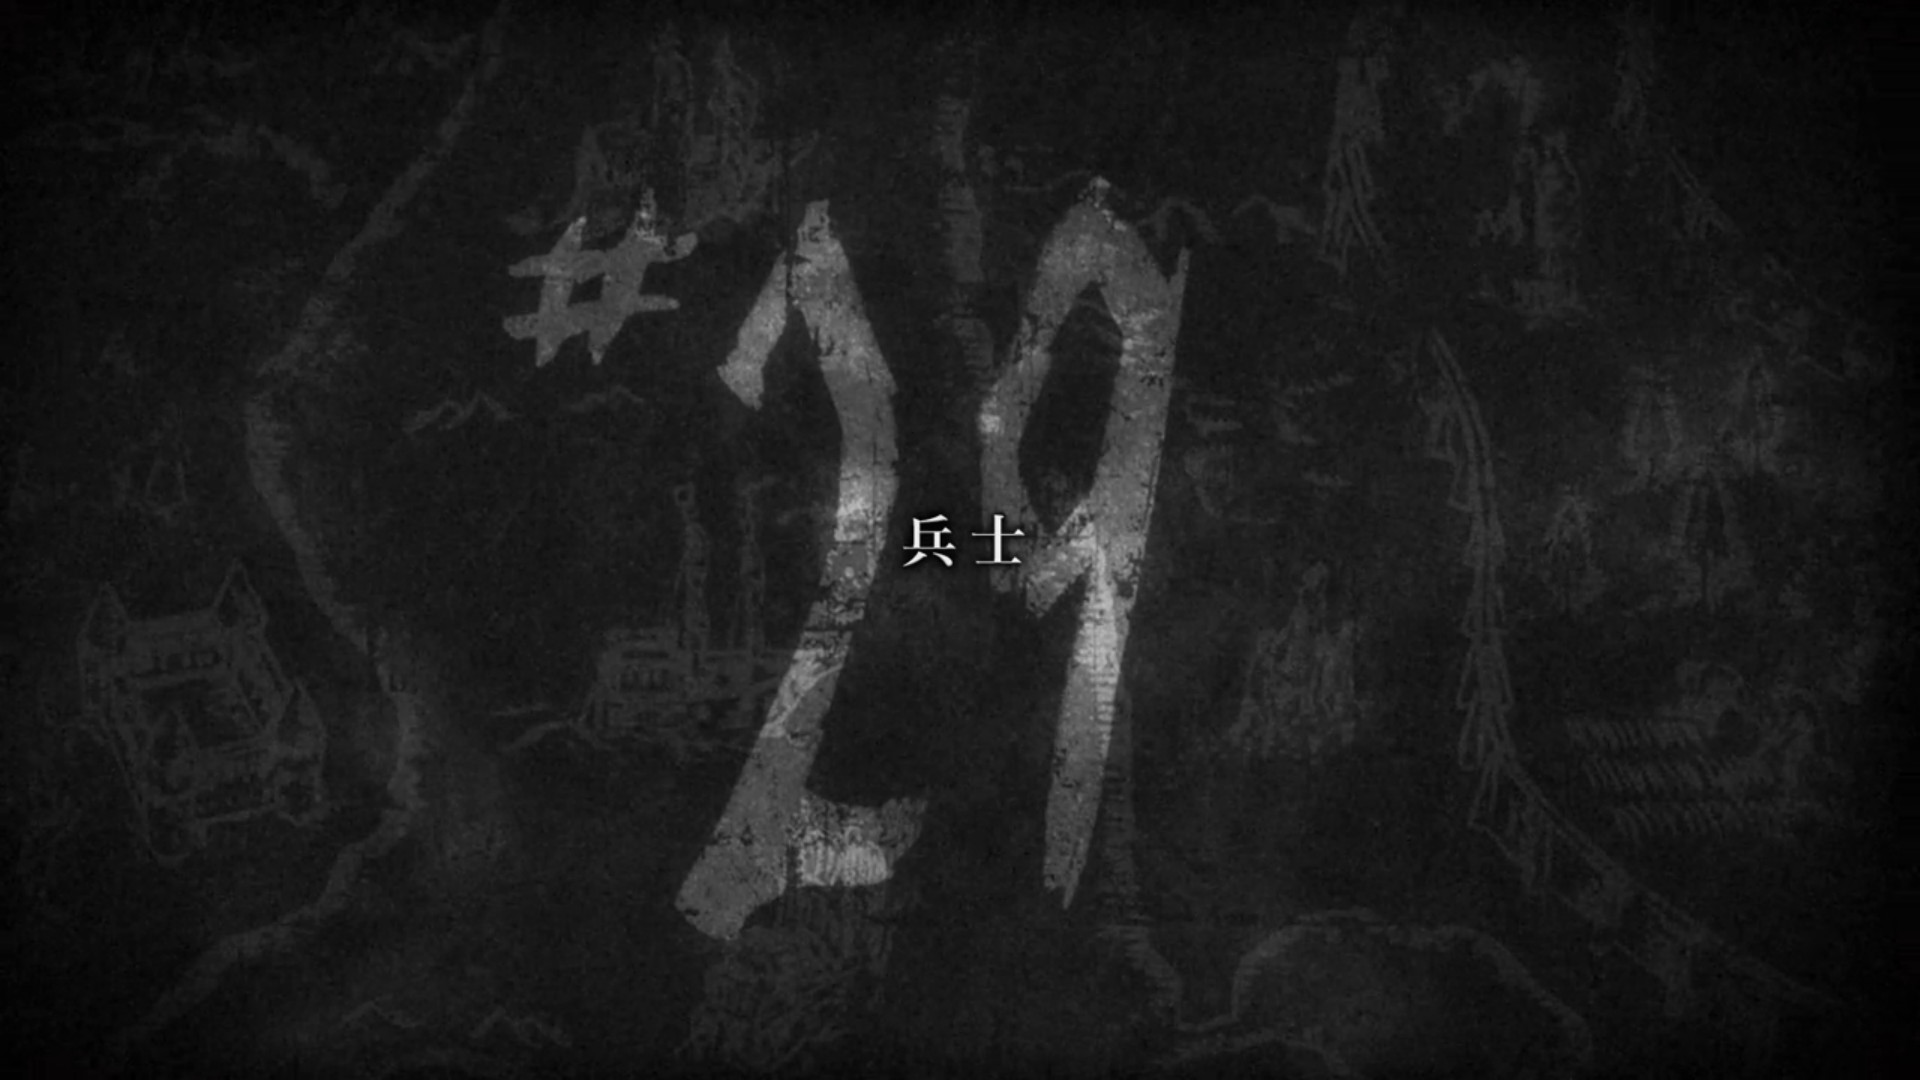 1920x1080 Image - Attack on Titan - Episode 29 Title Card.png | Attack on Titan Wiki  | FANDOM powered by Wikia